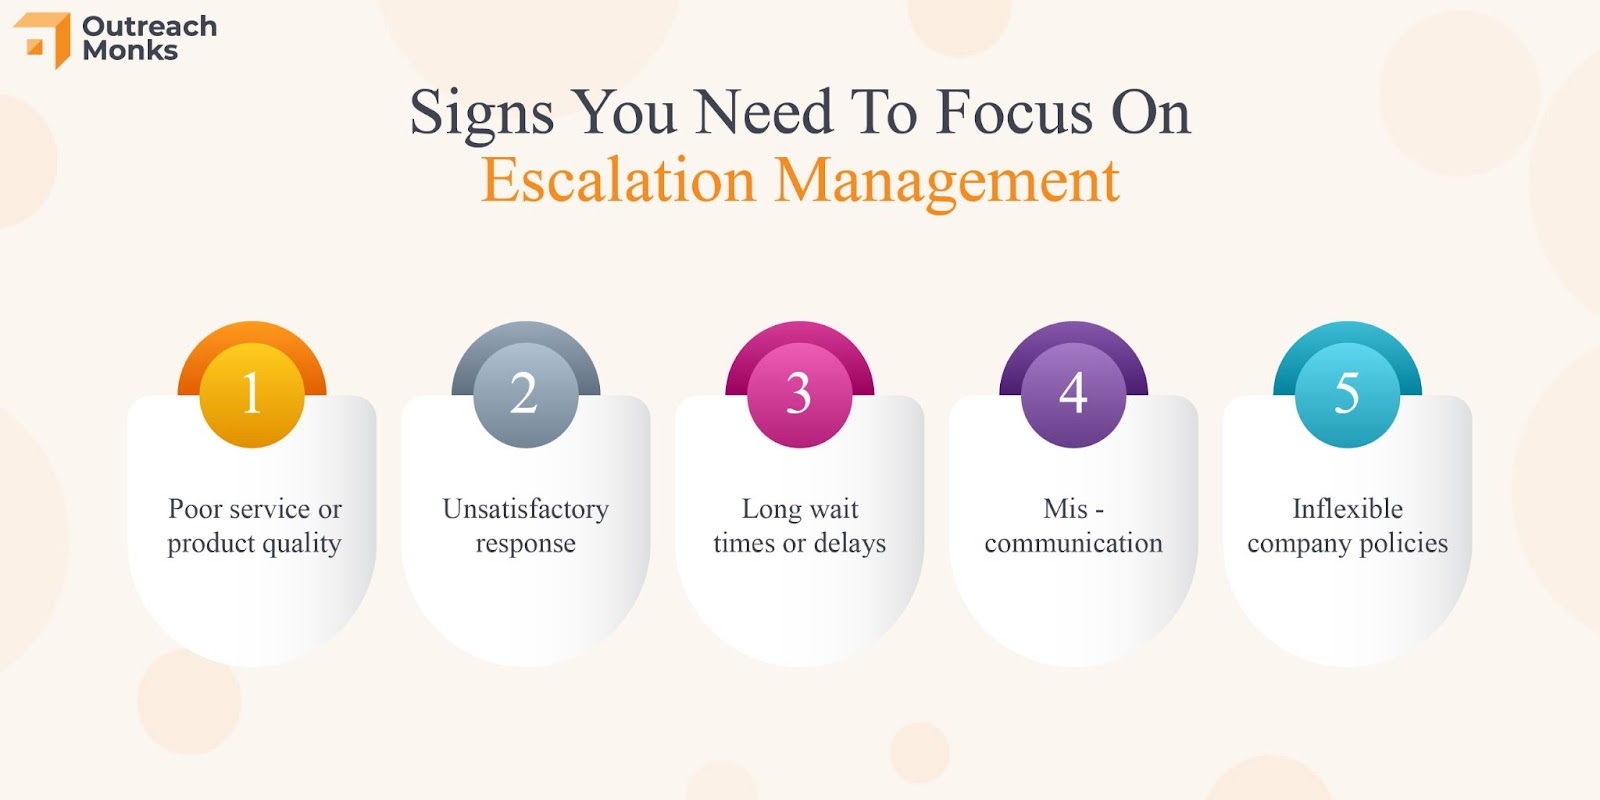 Signs you need to focus on escalation management